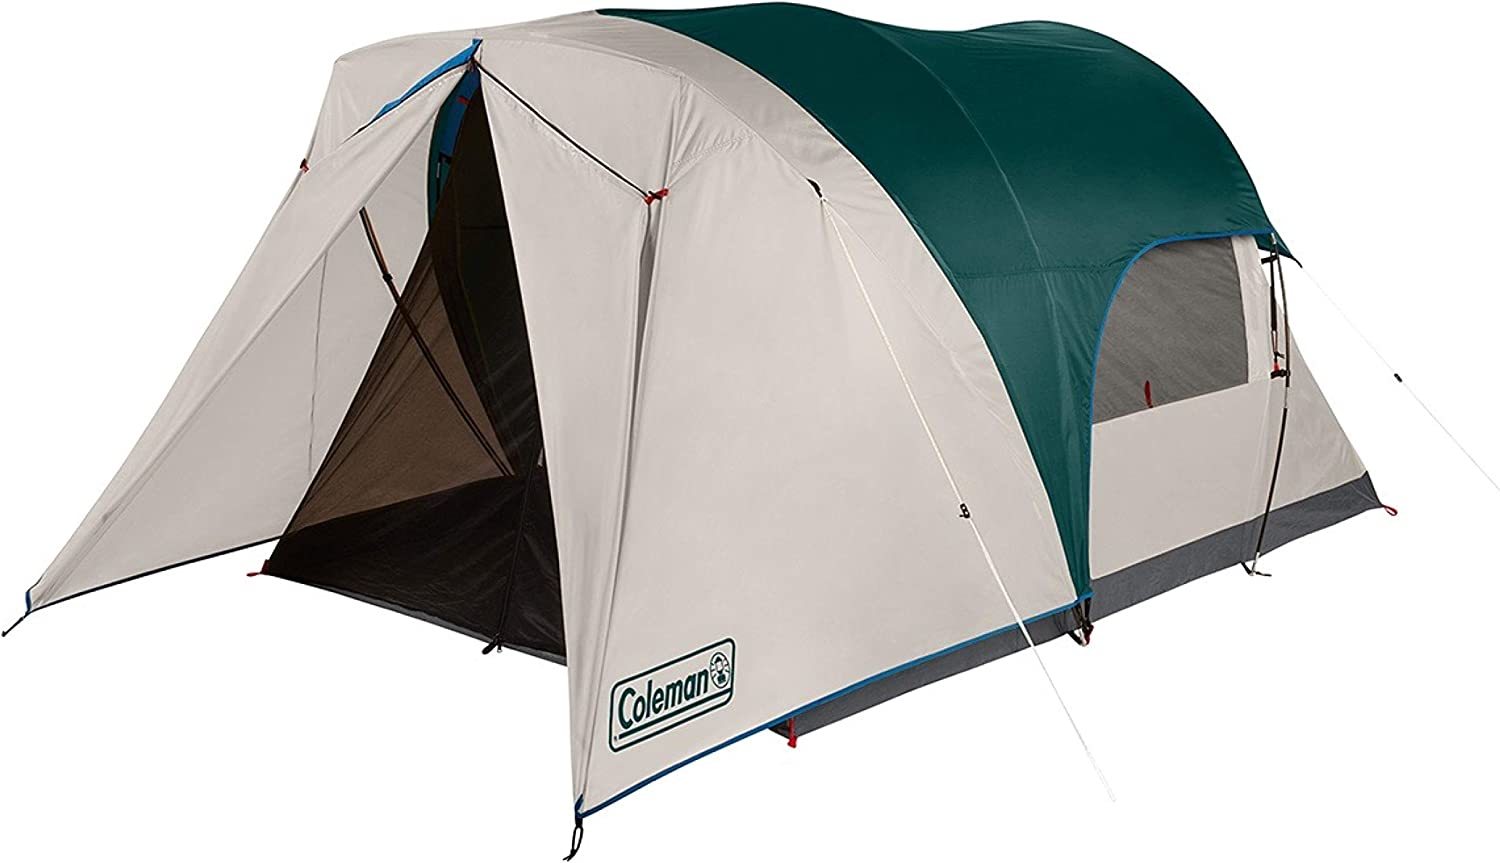 Primary image for Weatherproof Screen Room For The Coleman Cabin Camping Tent.